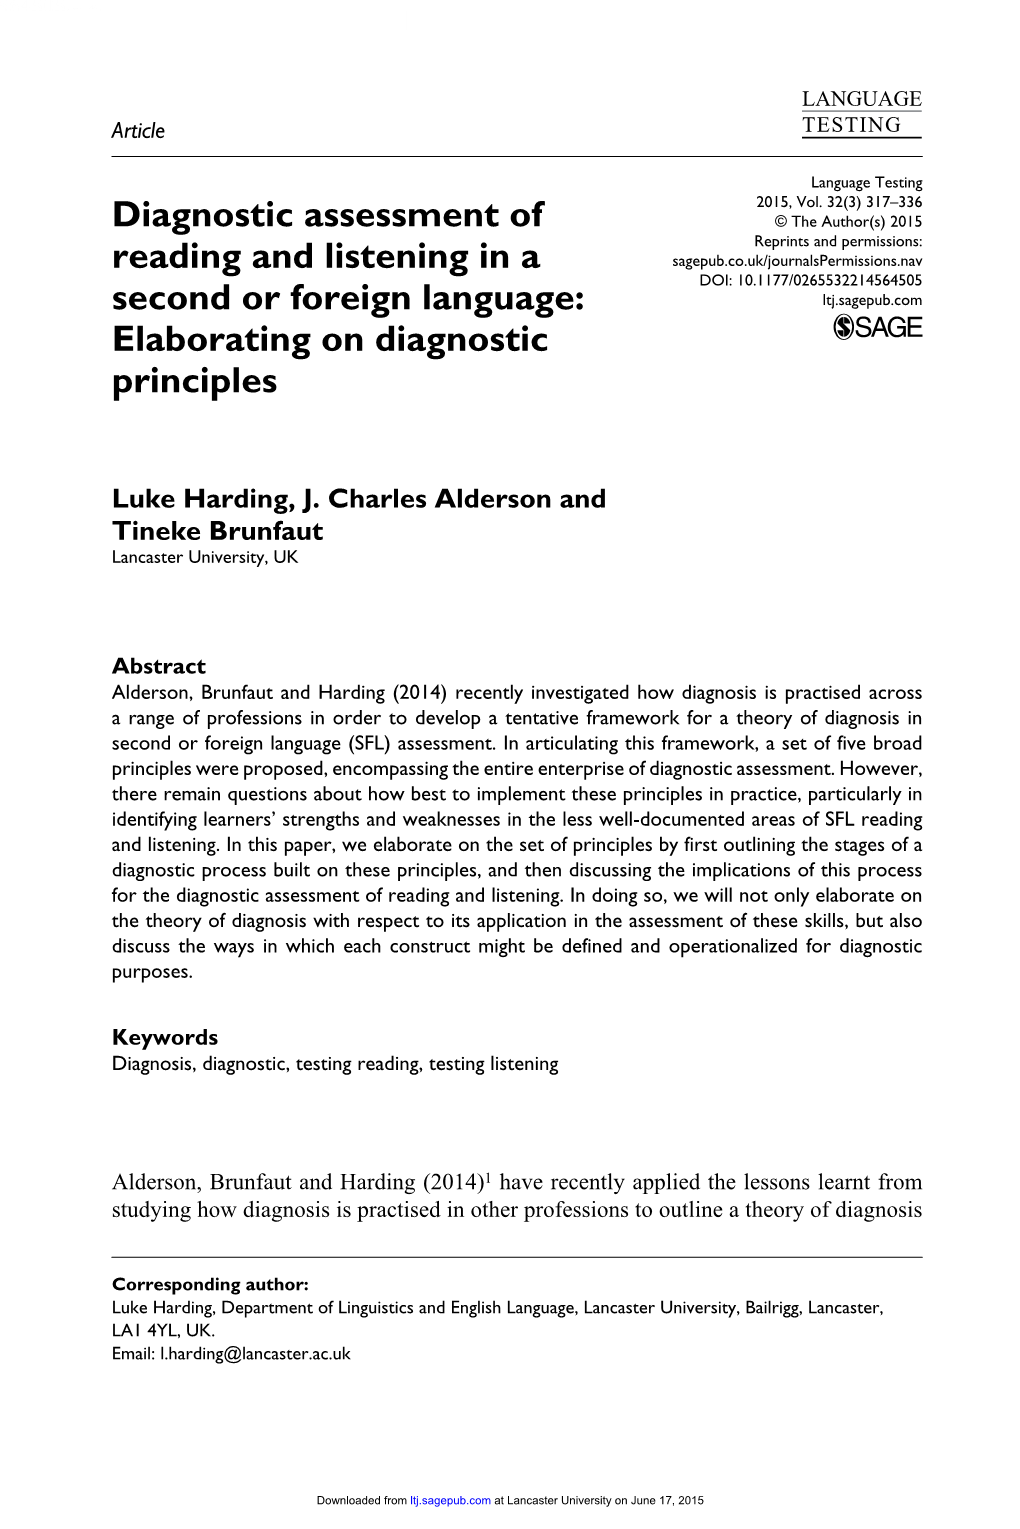 Diagnostic Assessment of Reading and Listening in a Second Or Foreign